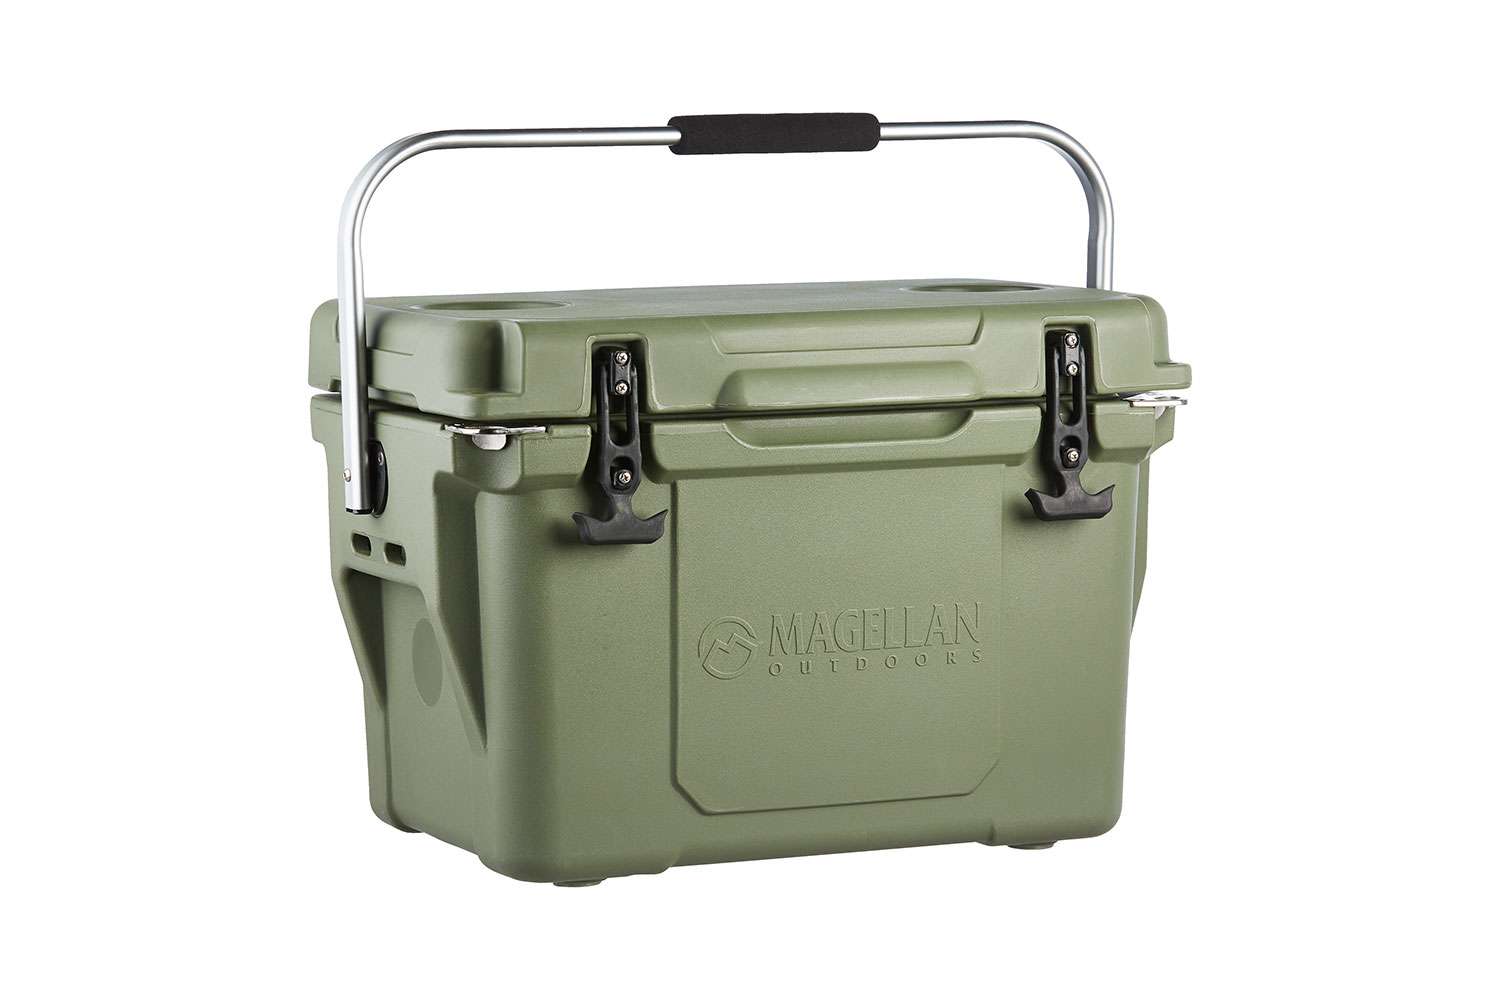 <p><b> Magellan Outdoors Ice Box 25, $99</b></p> Prepare for your next outdoor adventure or get-together with the Magellan Outdoors Ice Box 25, which features heavy-duty Roto Molded construction to offer durability. The thick, insulated design offers ice retention for days, and the removable, heavy-duty aluminum handle and molded side handles enable easy portability. Stainless-steel locking plates with built-in bottle openers. Built-in cup holders on top. Anti-skid feet. For prolonged ice retention and to keep contents cold longer itâs important to pre-chill the cooler before each use by moving your Magellan Outdoor Ice Box Cooler indoors to allow the temperature of the material and internal insulation to condition to household ambient temperature. Fill the cooler with ice or use frozen ice containers to bring the cooler to desired pre-chilled temperature. Cooling all intended contents will also aid in ice retention.<br> <a href=